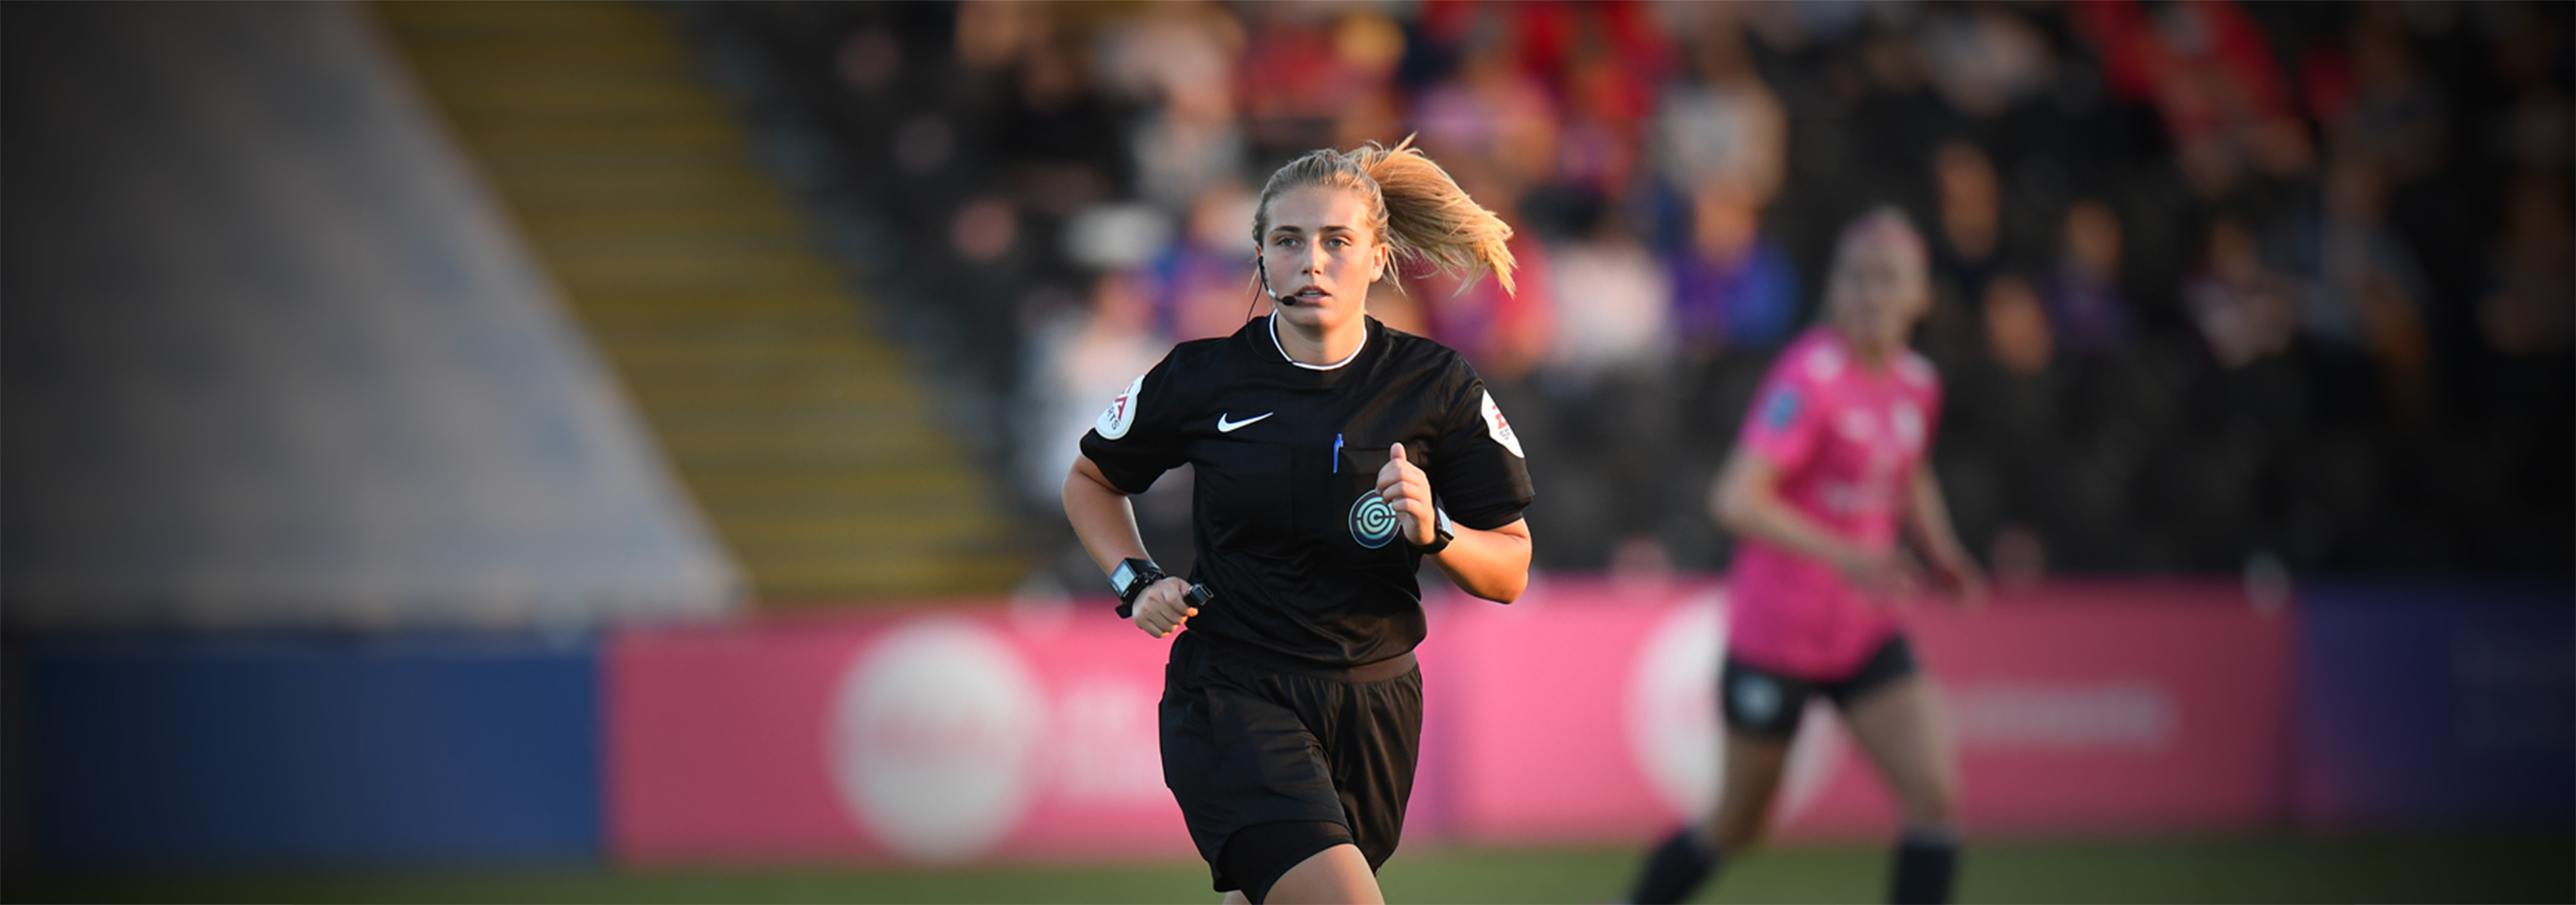 A female referee running during a match